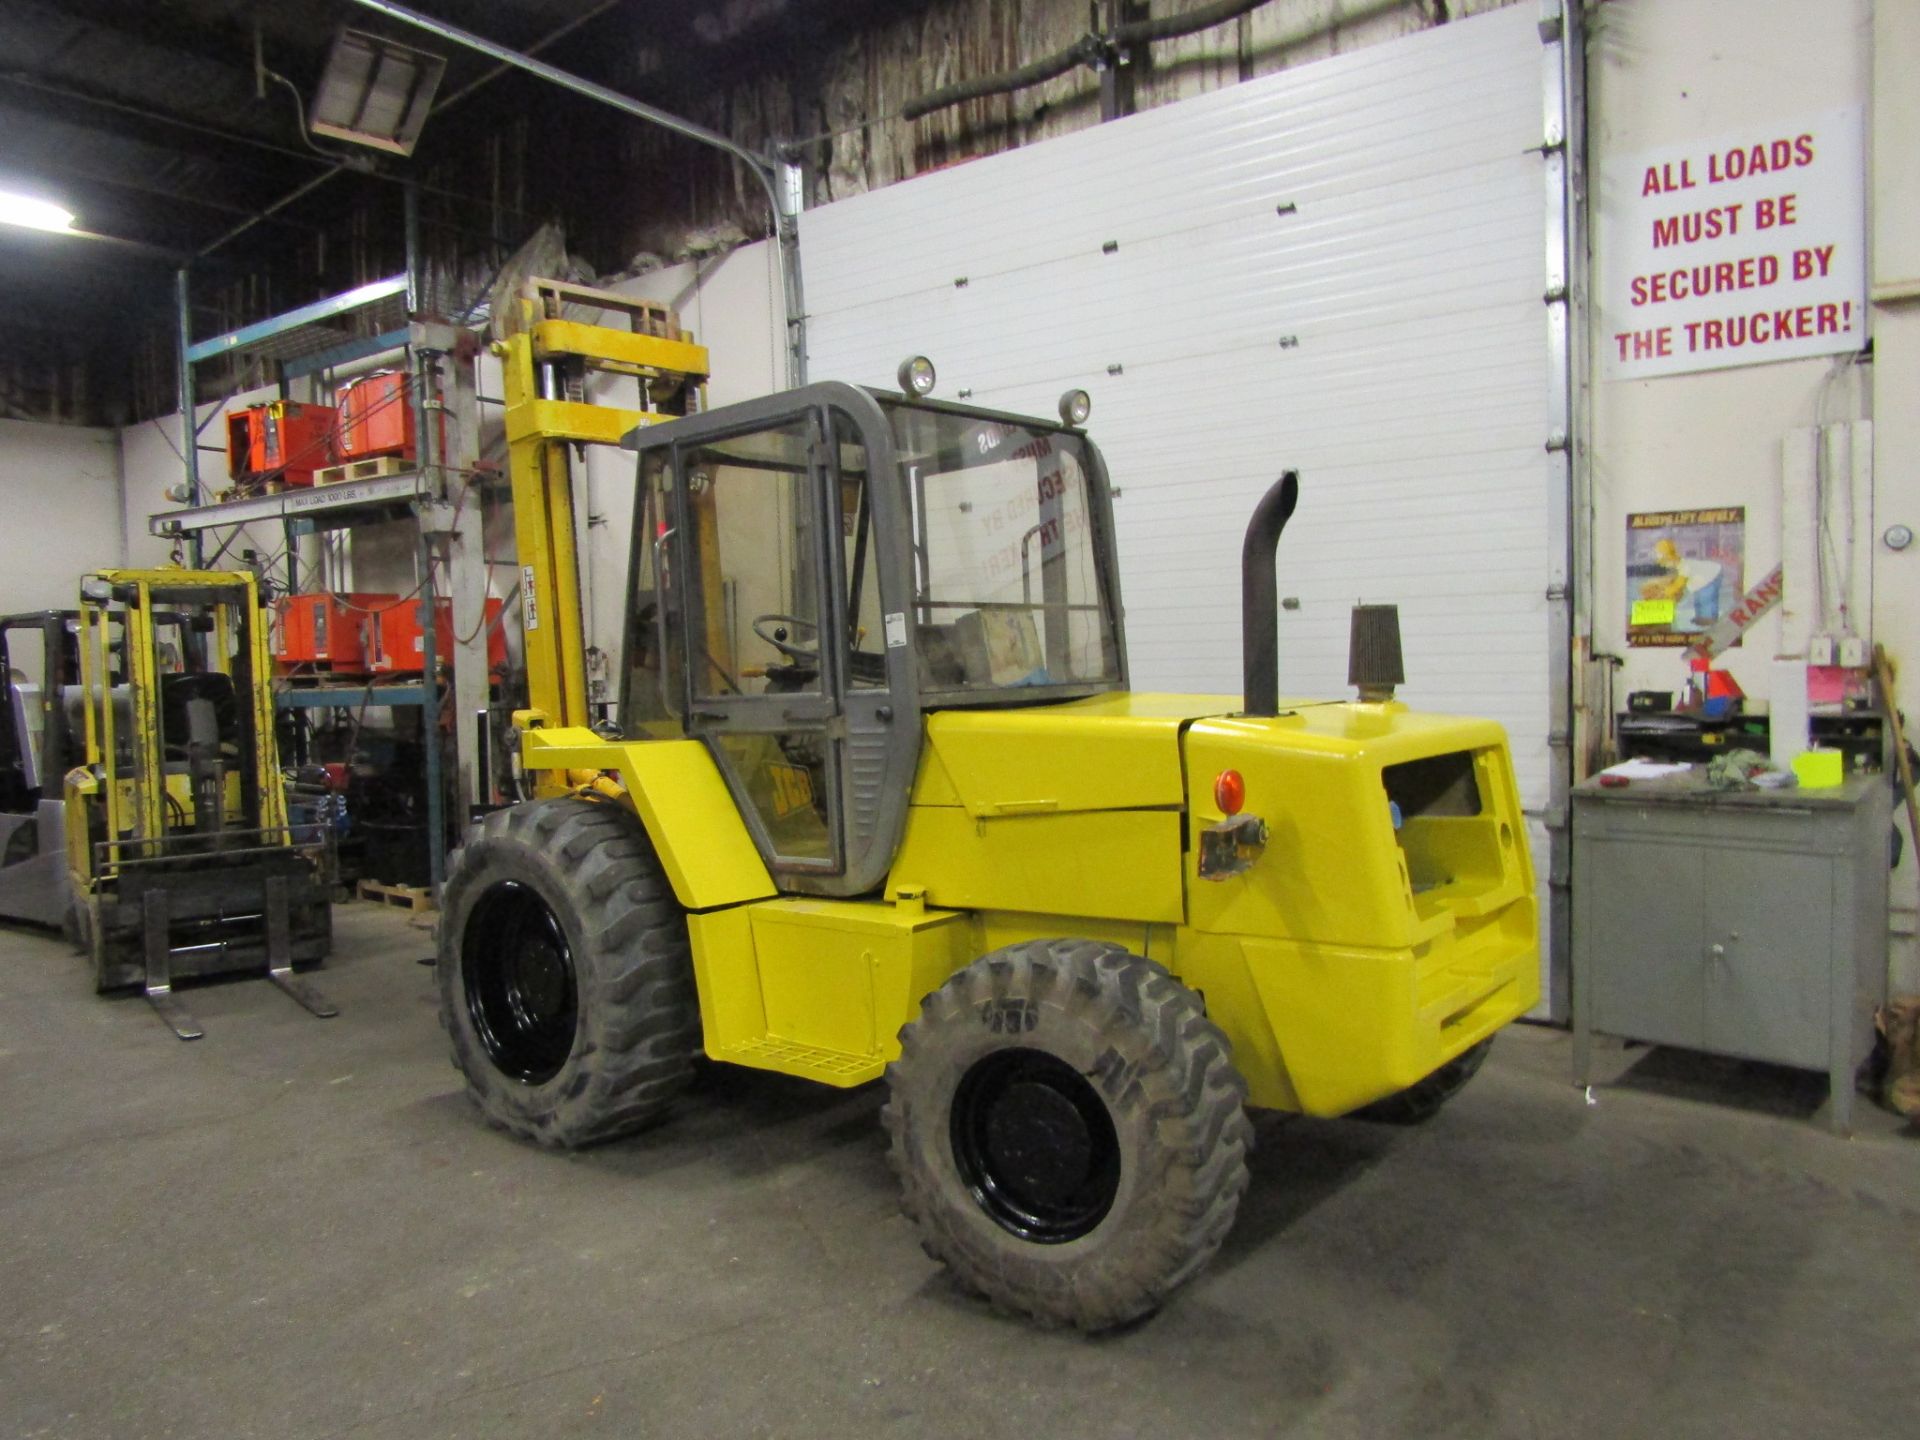 JCB 6000lbs OUTDOOR Forklift with FOUR-WHEEL DRIVE with 3-stage mast & sideshift - diesel powered - Image 2 of 2